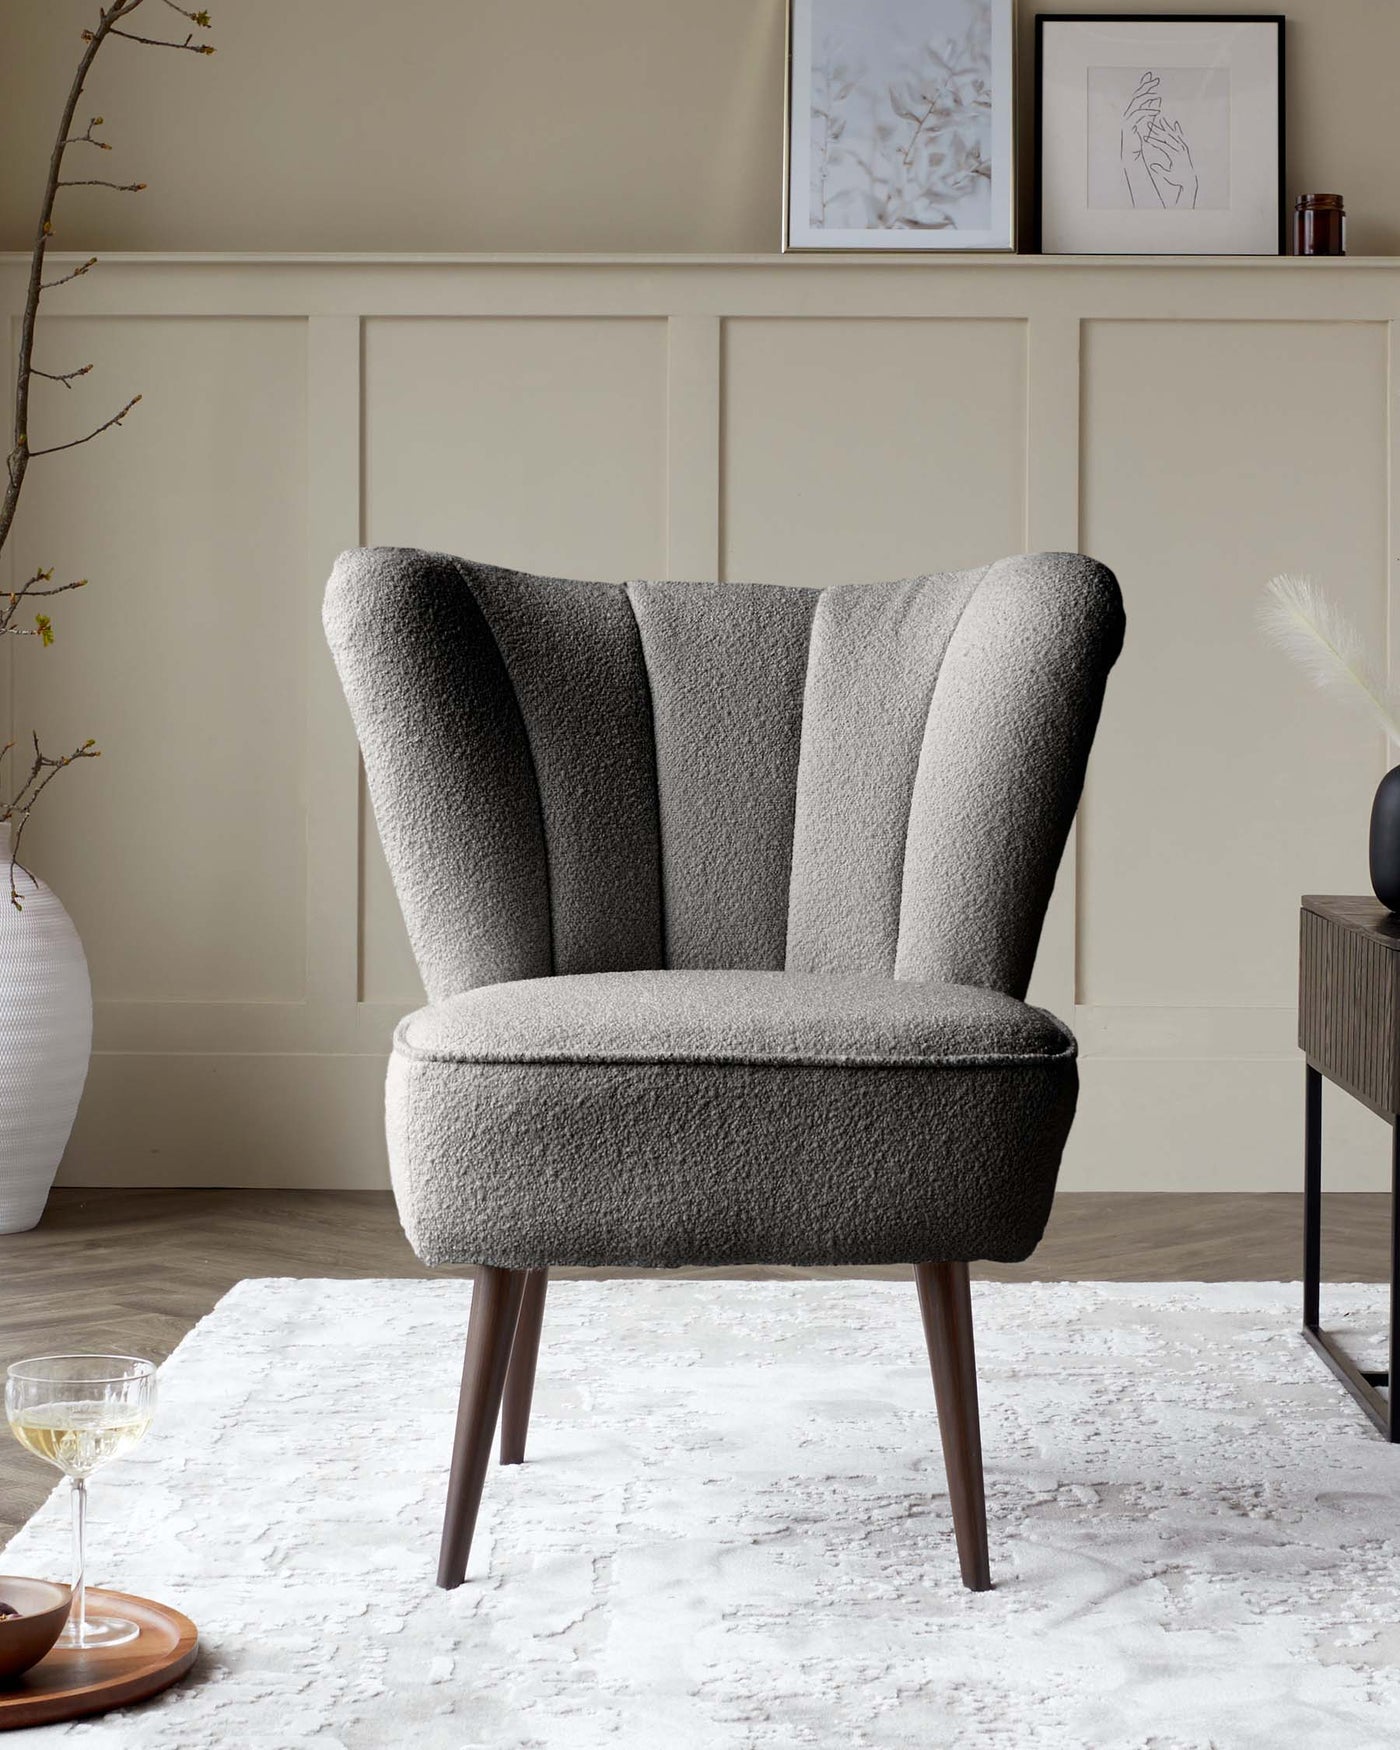 A modern textured fabric wingback chair with a high back and curved lines, coloured in shades of grey, with tapered dark wooden legs, situated on a white and grey patterned area rug.